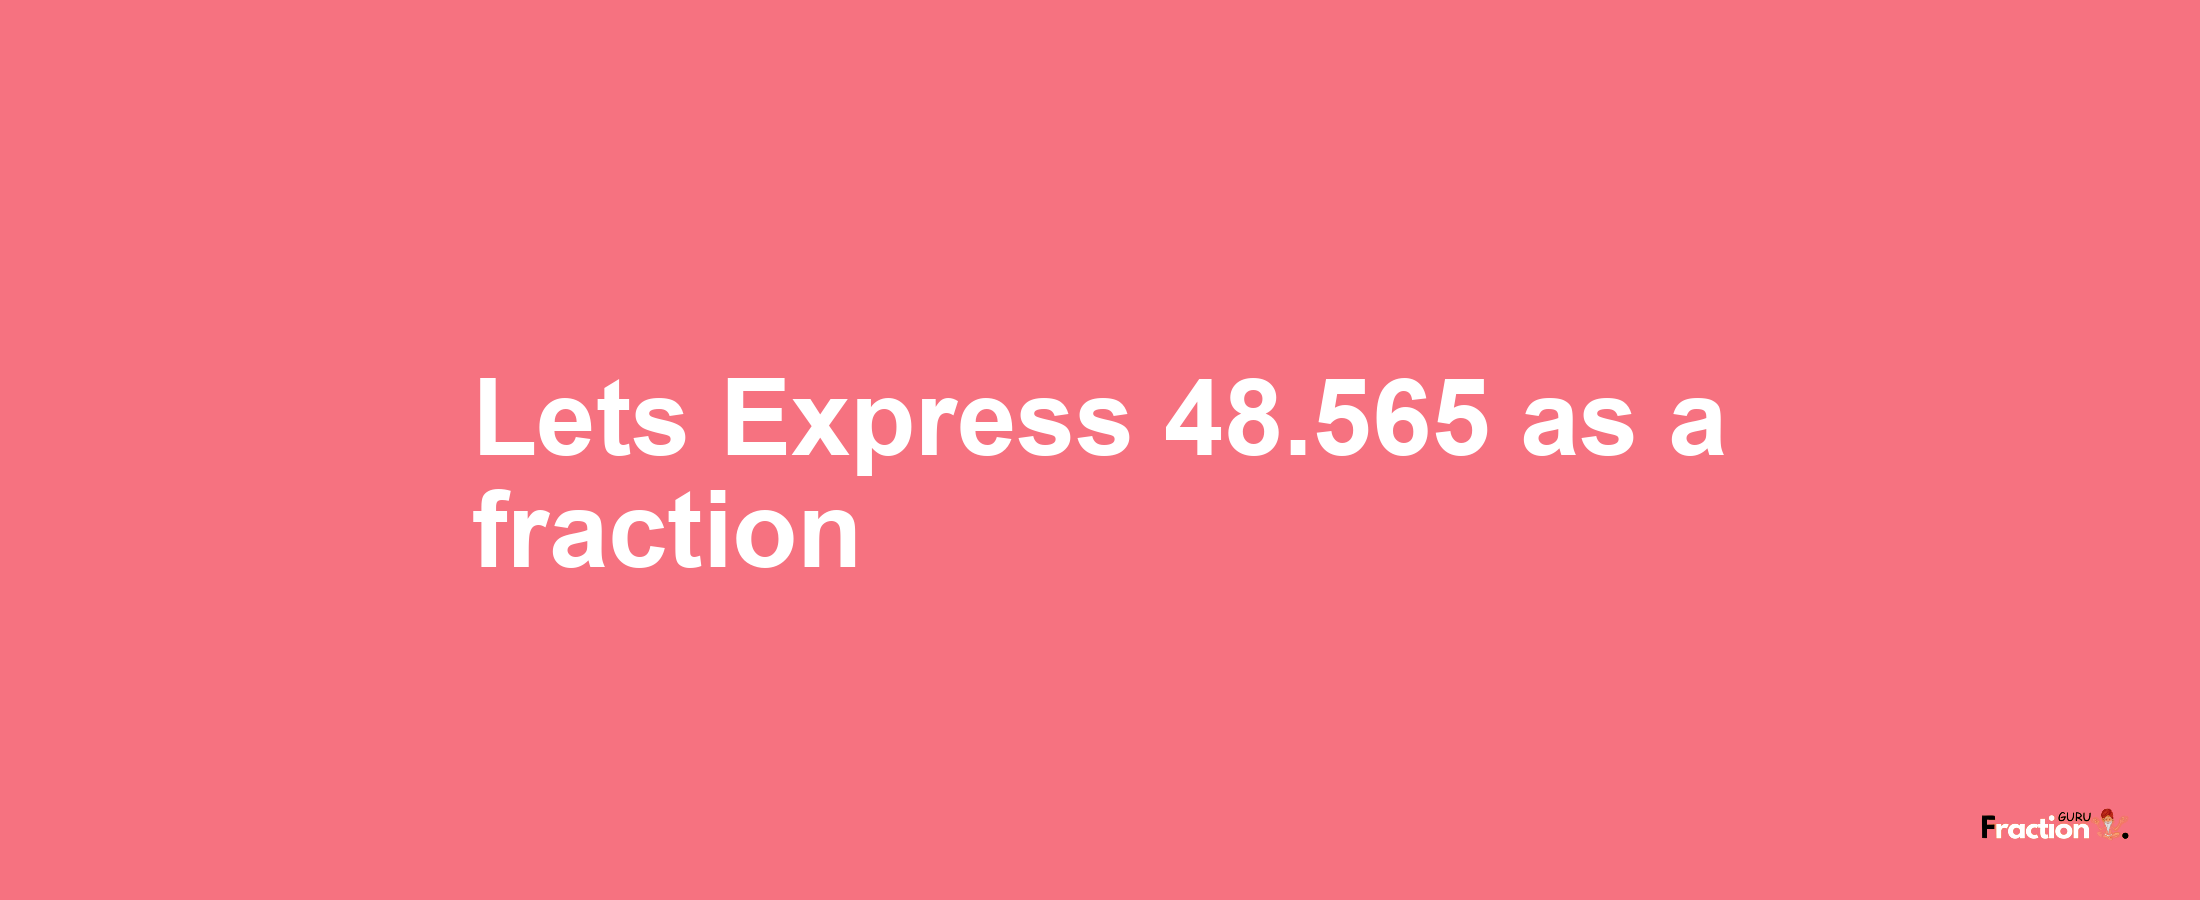 Lets Express 48.565 as afraction